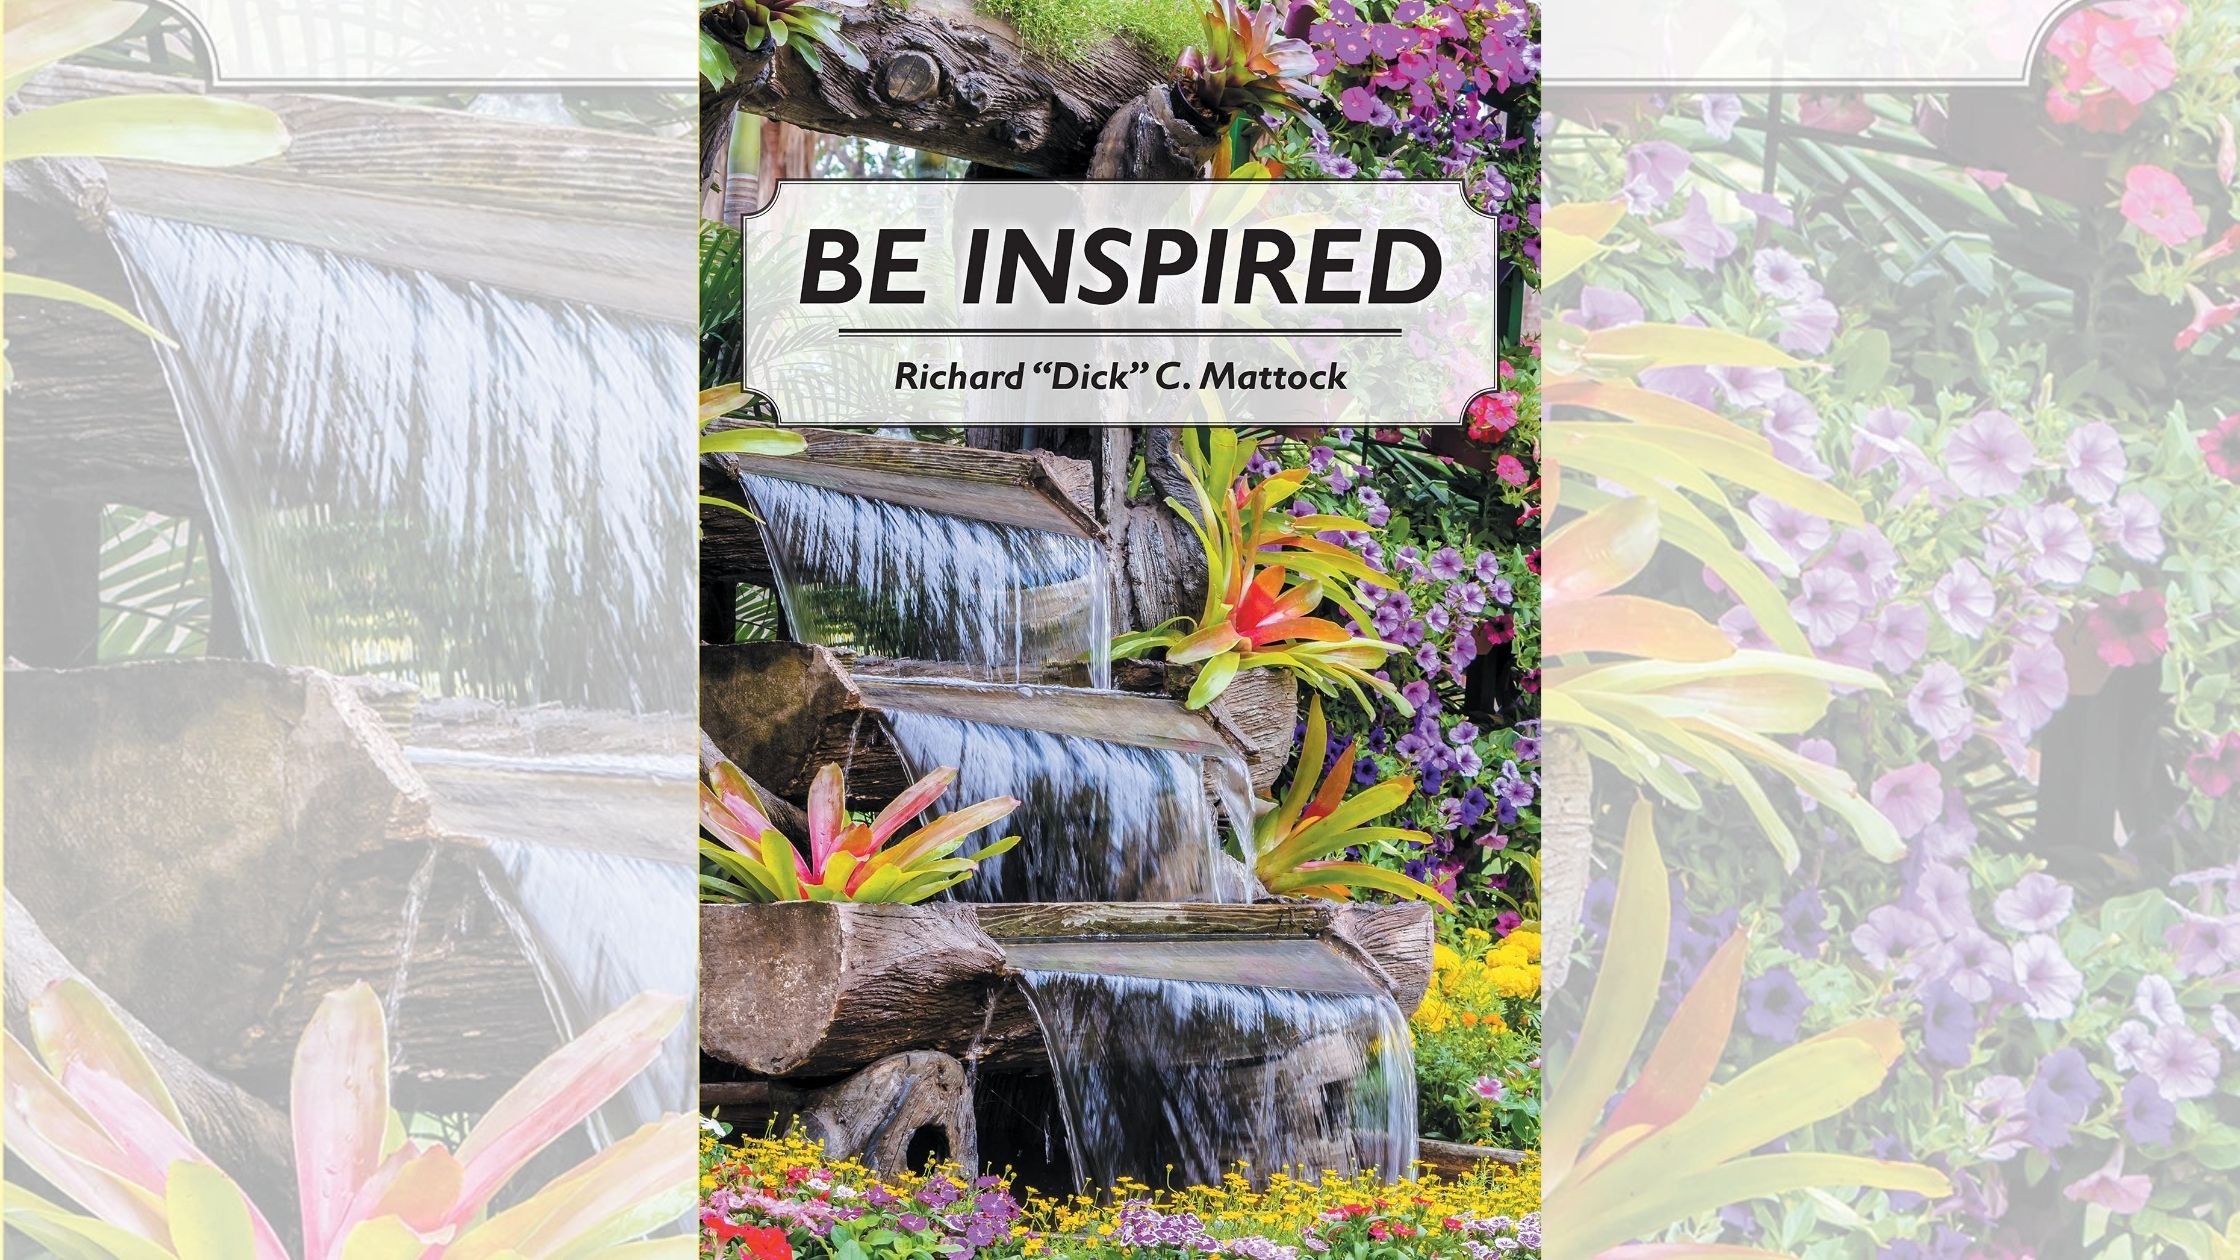 Richard “Dick” C. Mattock’s newly released “Be Inspired” is a thoughtful collection of poetry that addresses a variety of occasions